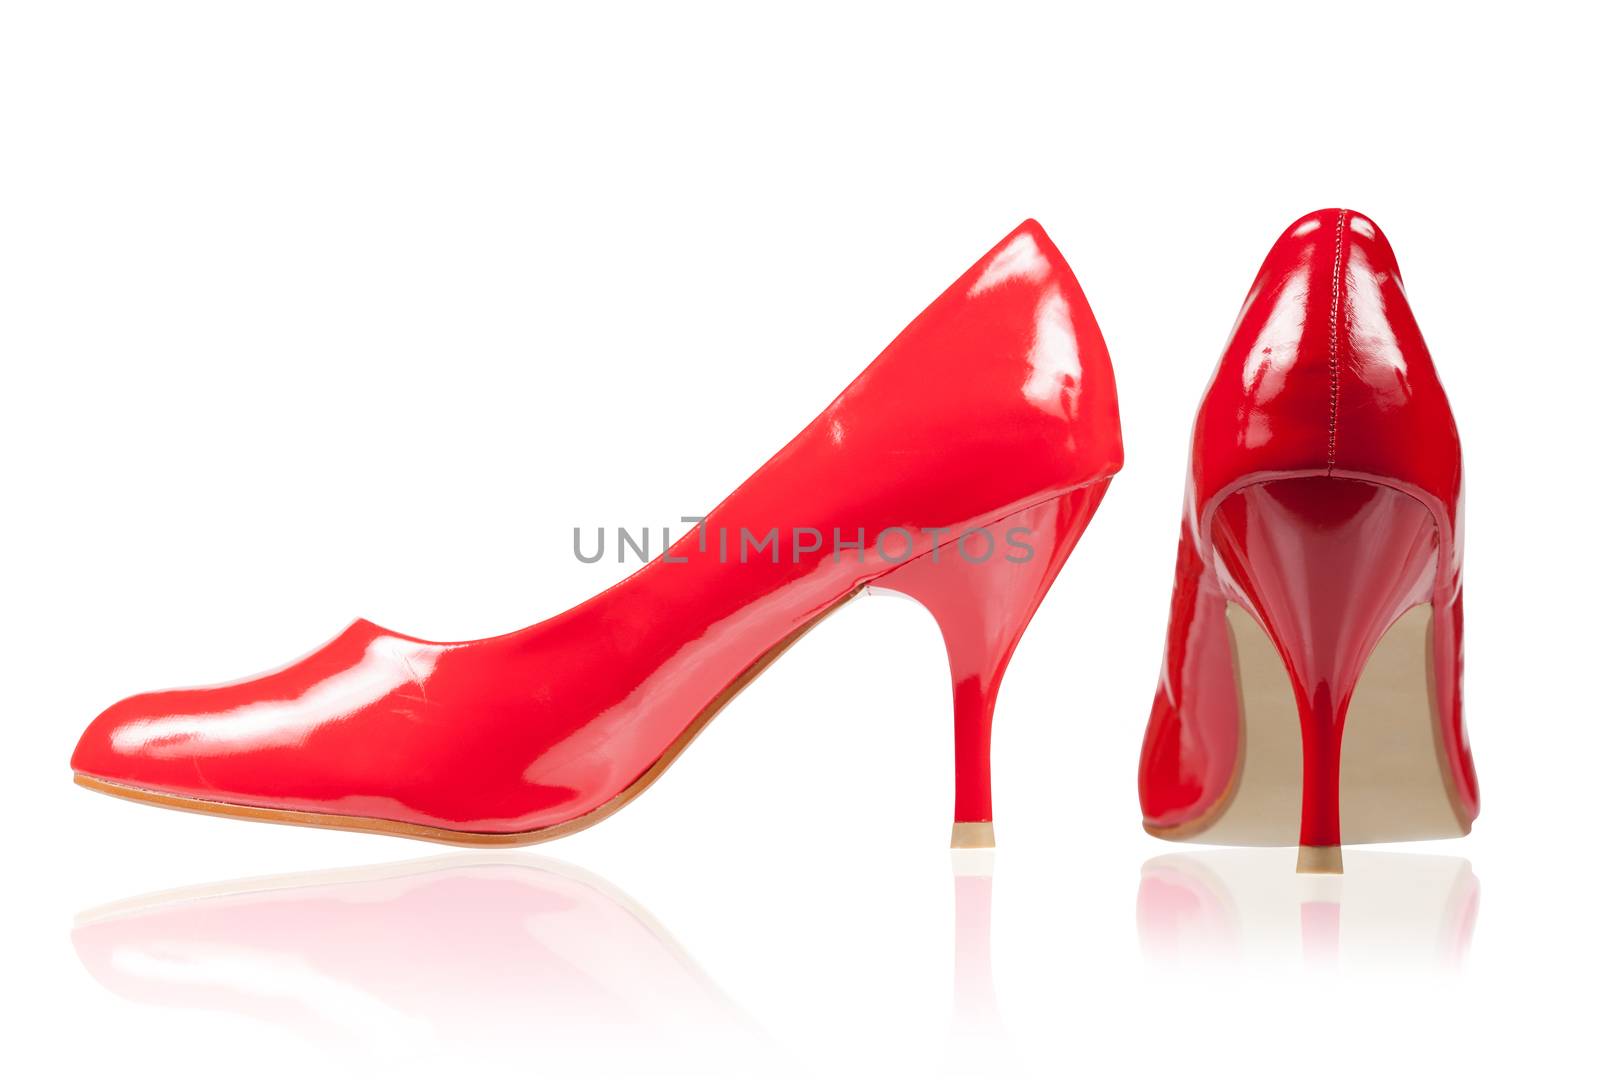 Red shoes on a thin heel. View side and rear by AleksandrN